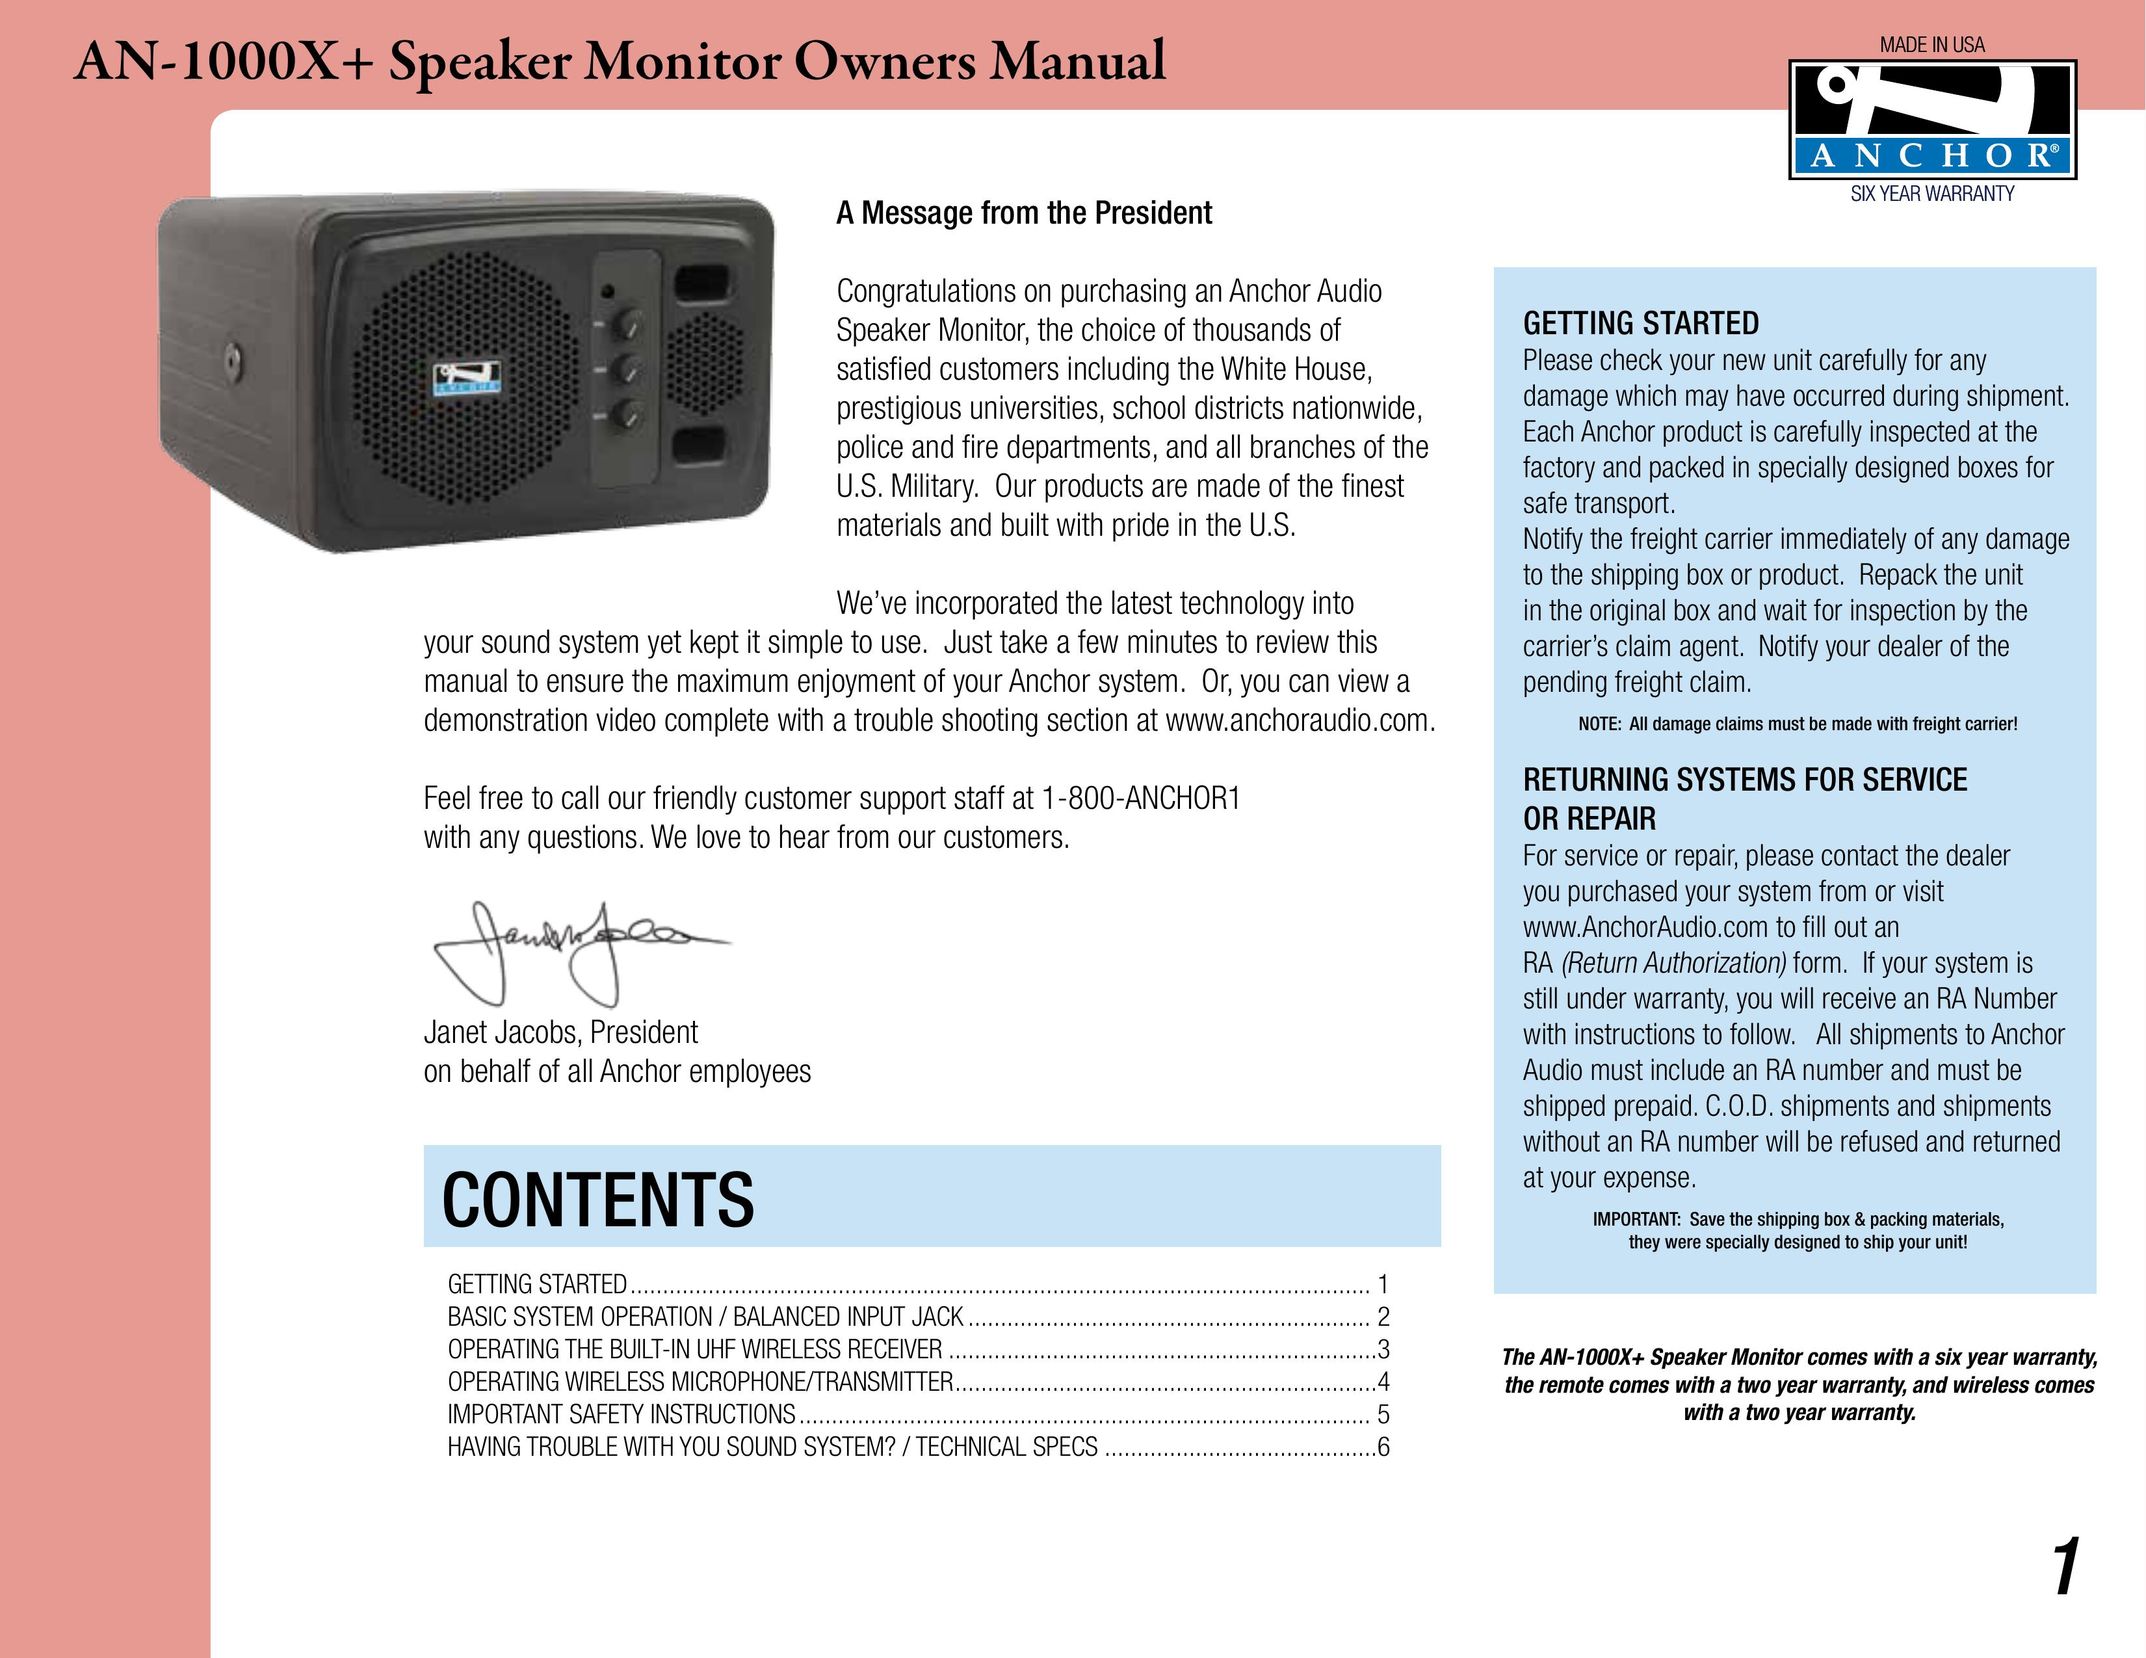 Anchor Audio AN-1000XF1+ Speaker System User Manual